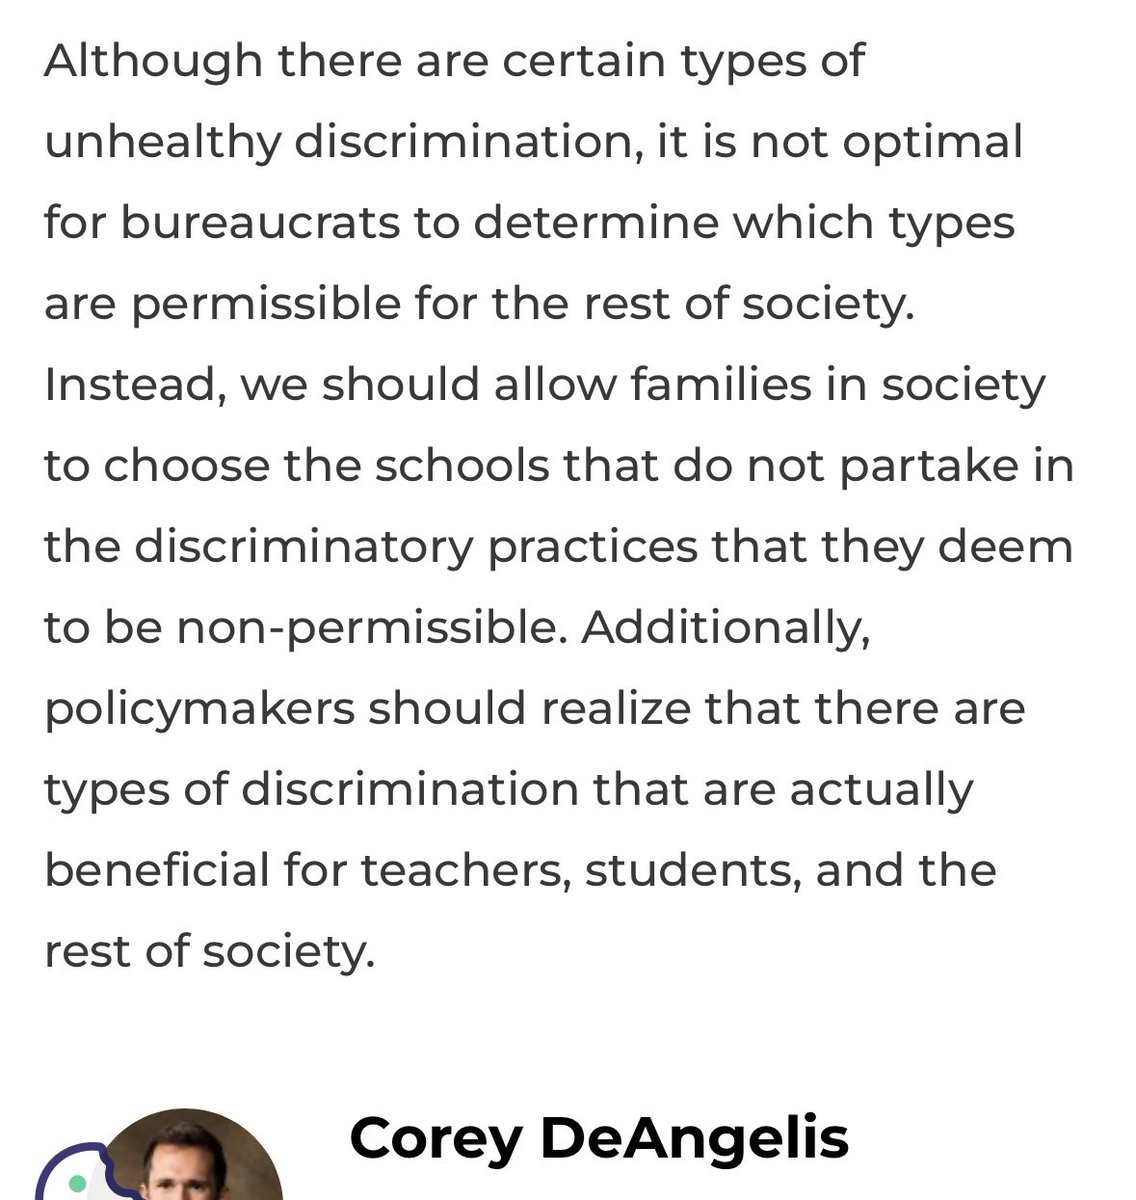 An article written by Corey DeAngelis in 2016 outlines his thoughts on why he thinks discrimination is a good thing. Remember vouchers aren’t about school choice. They are tools to legitimize discrimination. fee.org/articles/legal… #VouchersAreAScam